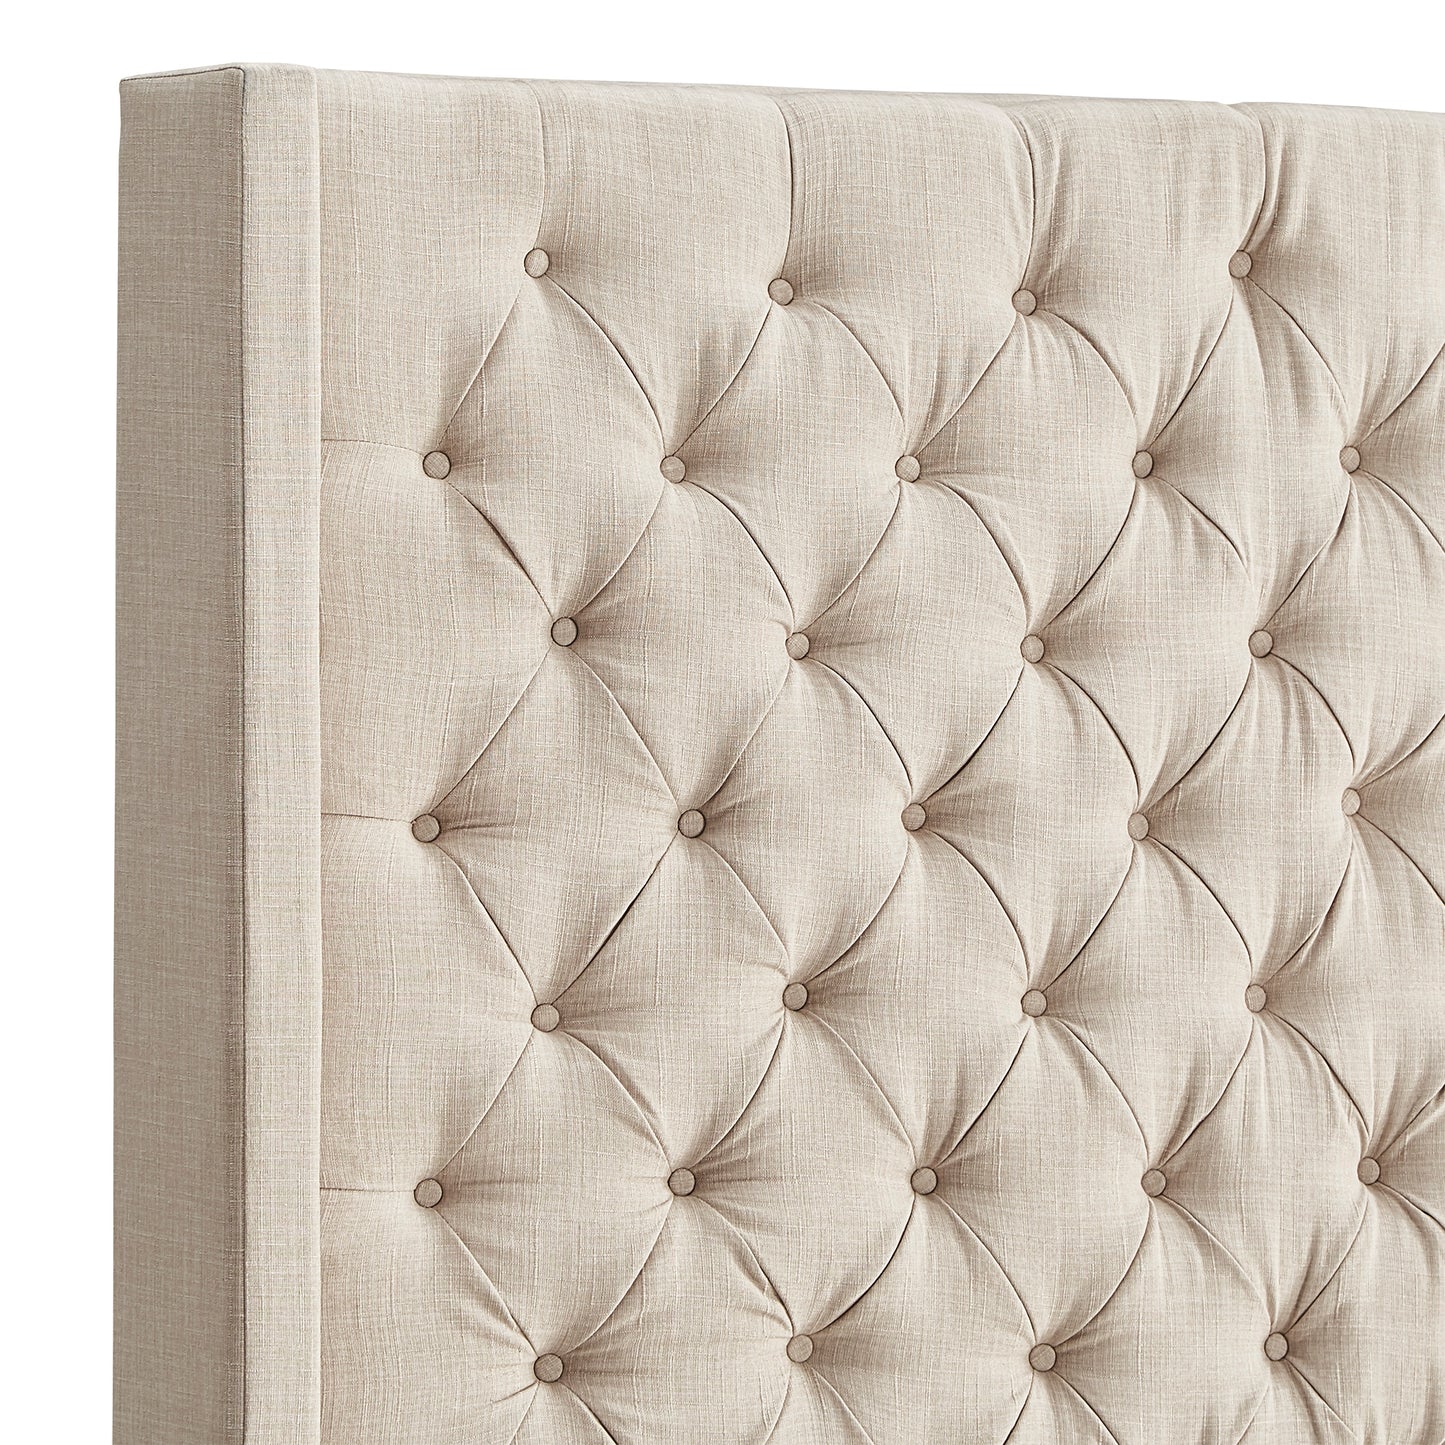 Wingback Button Tufted Linen Fabric Headboard - Beige, 84-inch Height, Queen Size